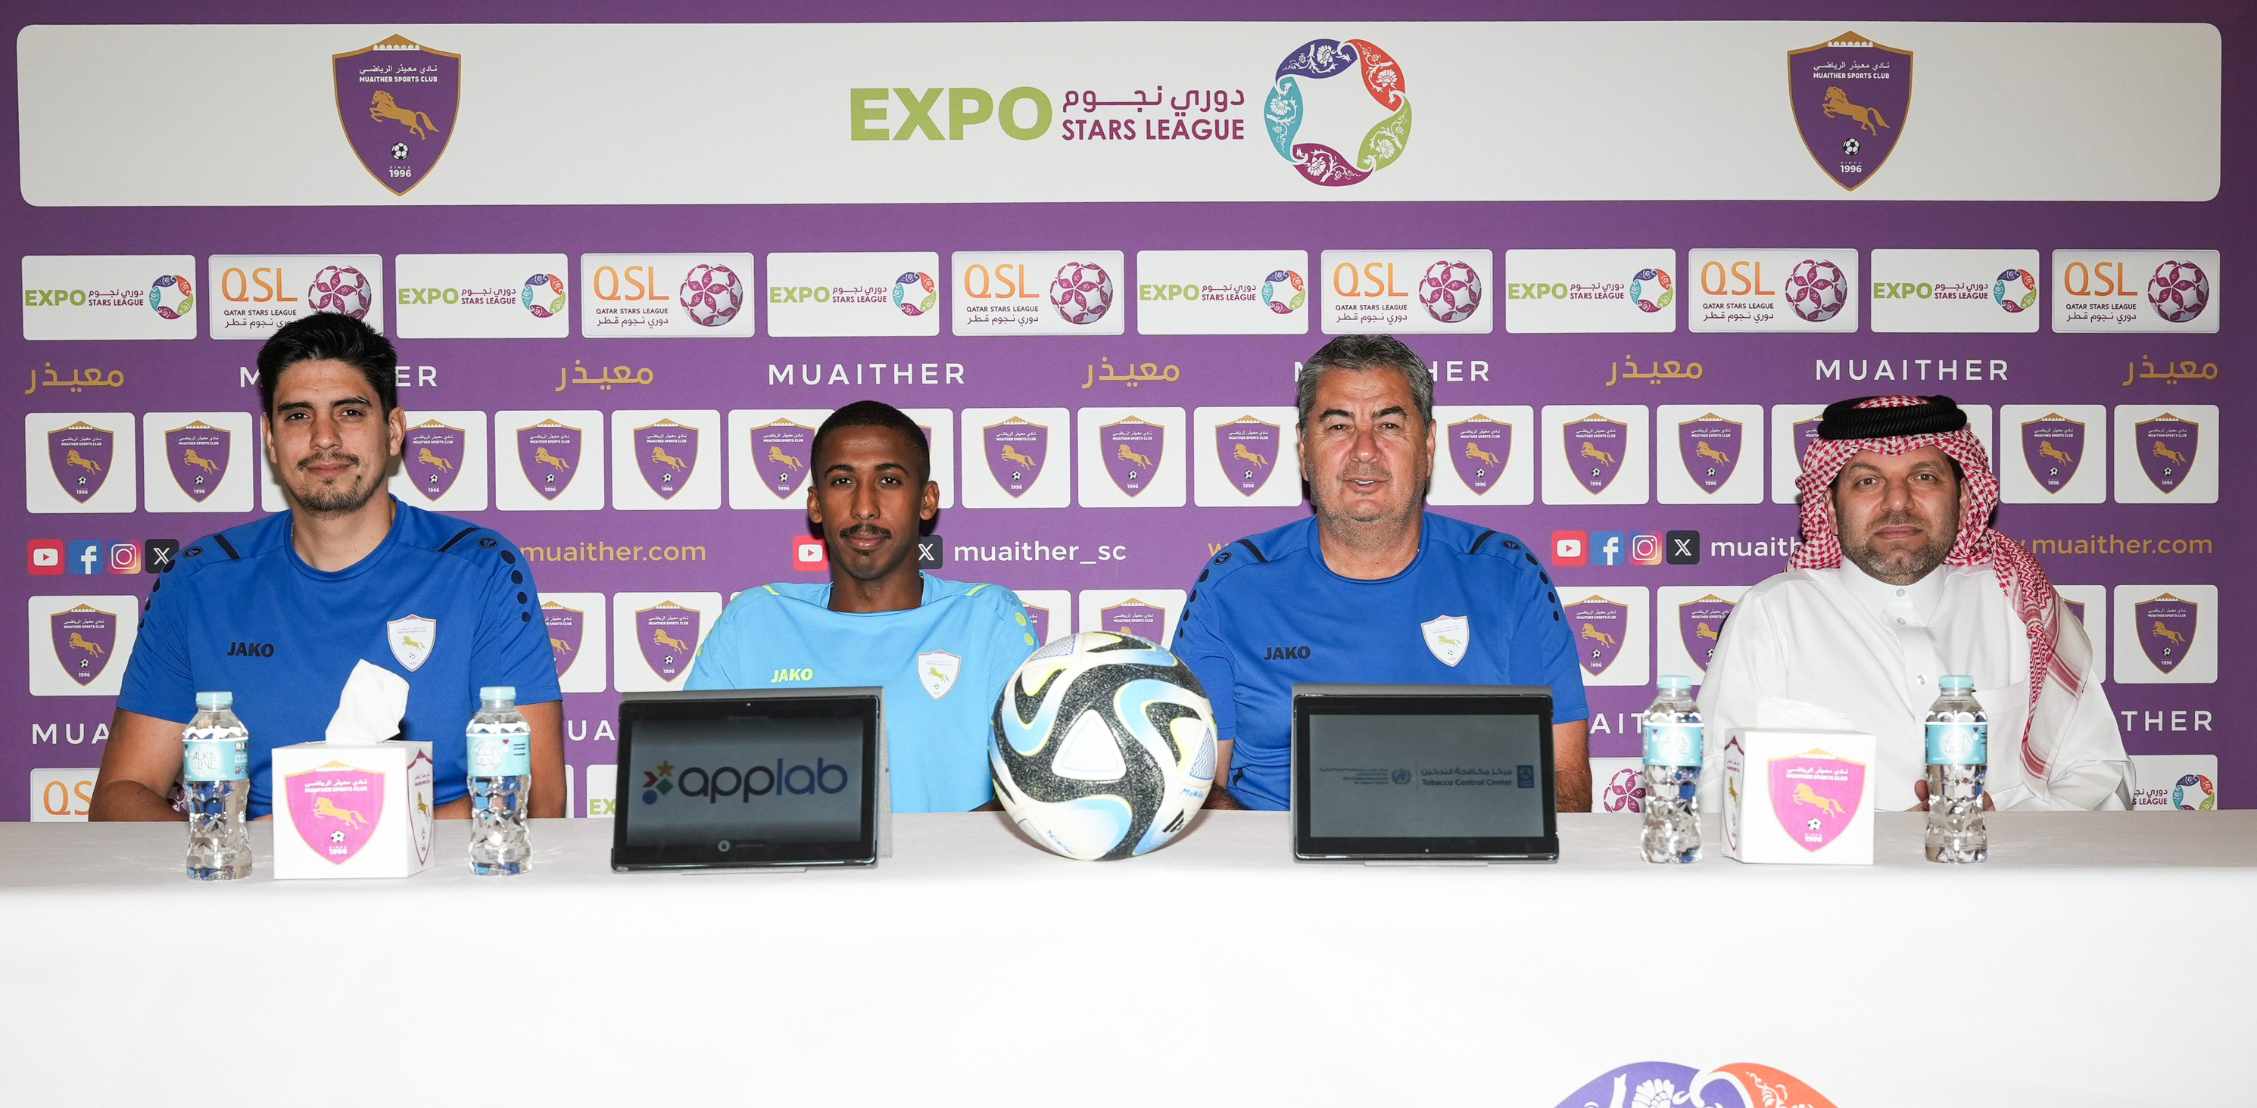 Da Silva: The Al Rayyan match is strong and difficult, and we seek to win